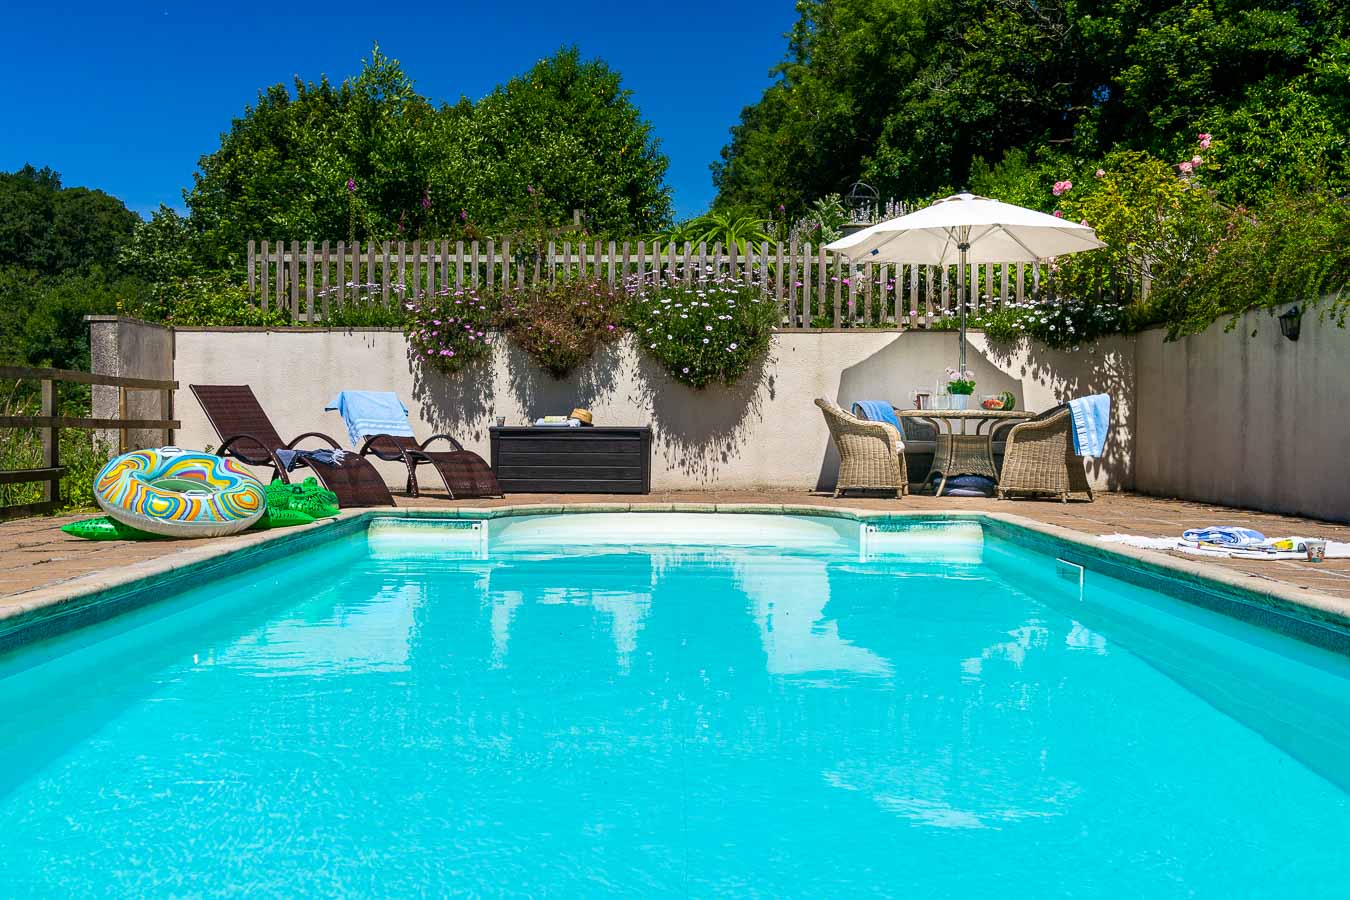 The outdoor heated swimming pool with sun loungers and rattan garden furniture with cushions and umbrella in Flear House garden.